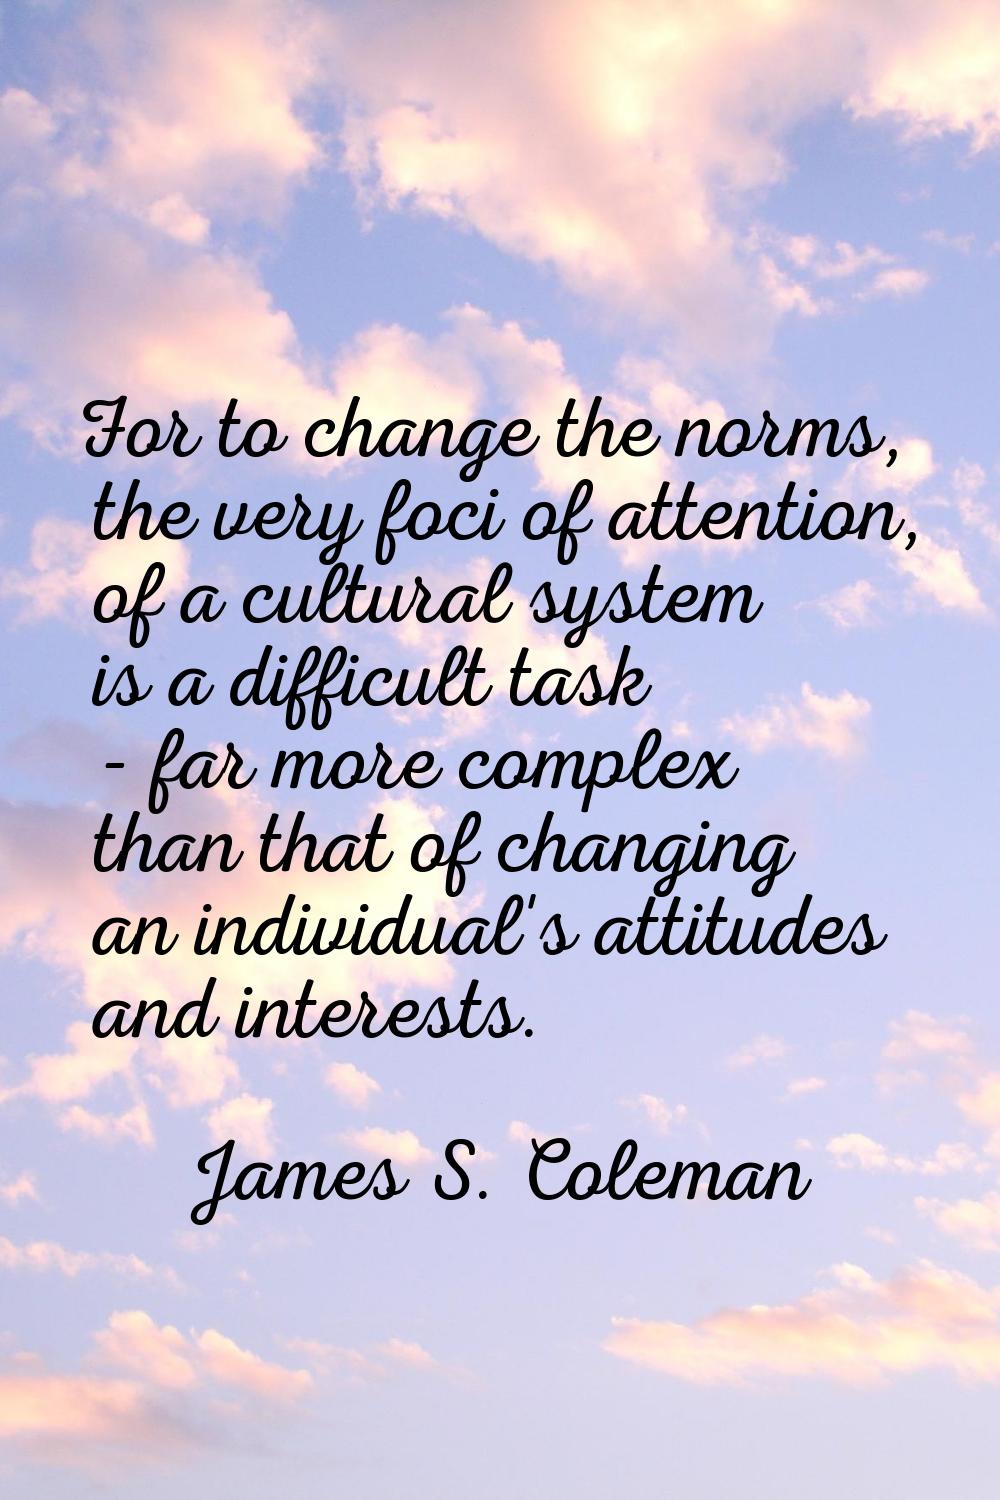 For to change the norms, the very foci of attention, of a cultural system is a difficult task - far